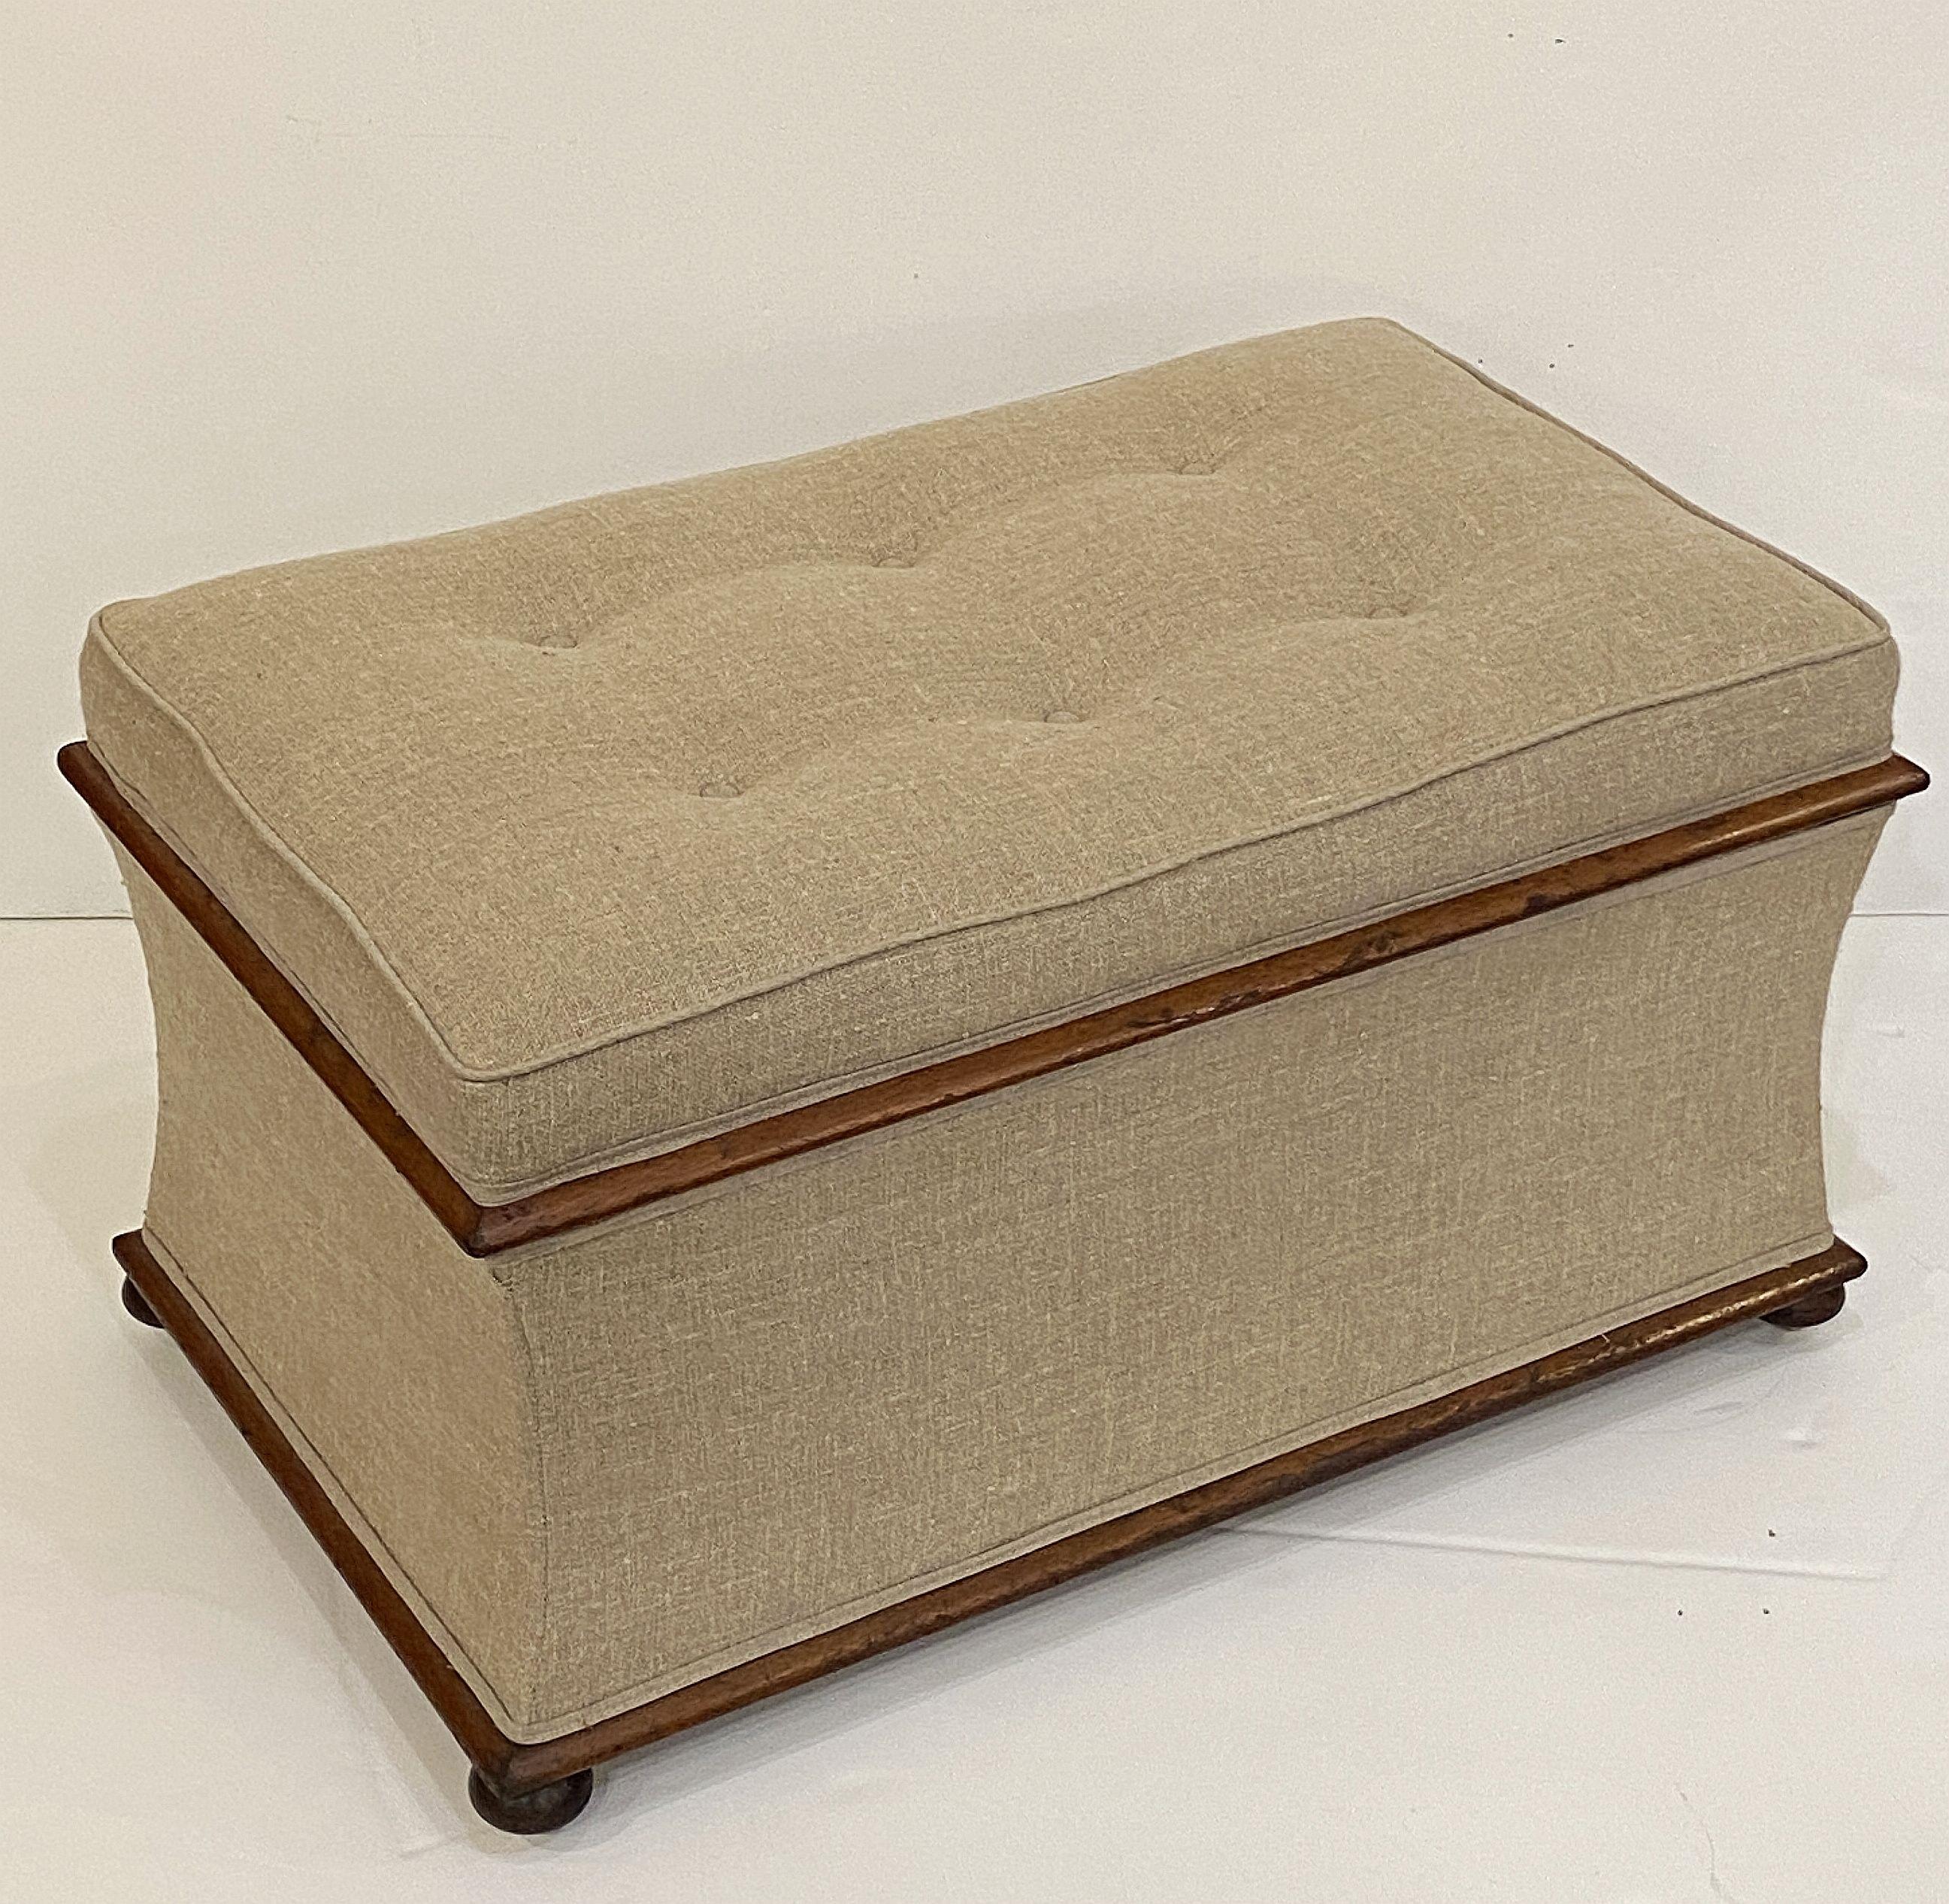 20th Century English Upholstered Trunk or Pouffe Ottoman Seat on Casters For Sale